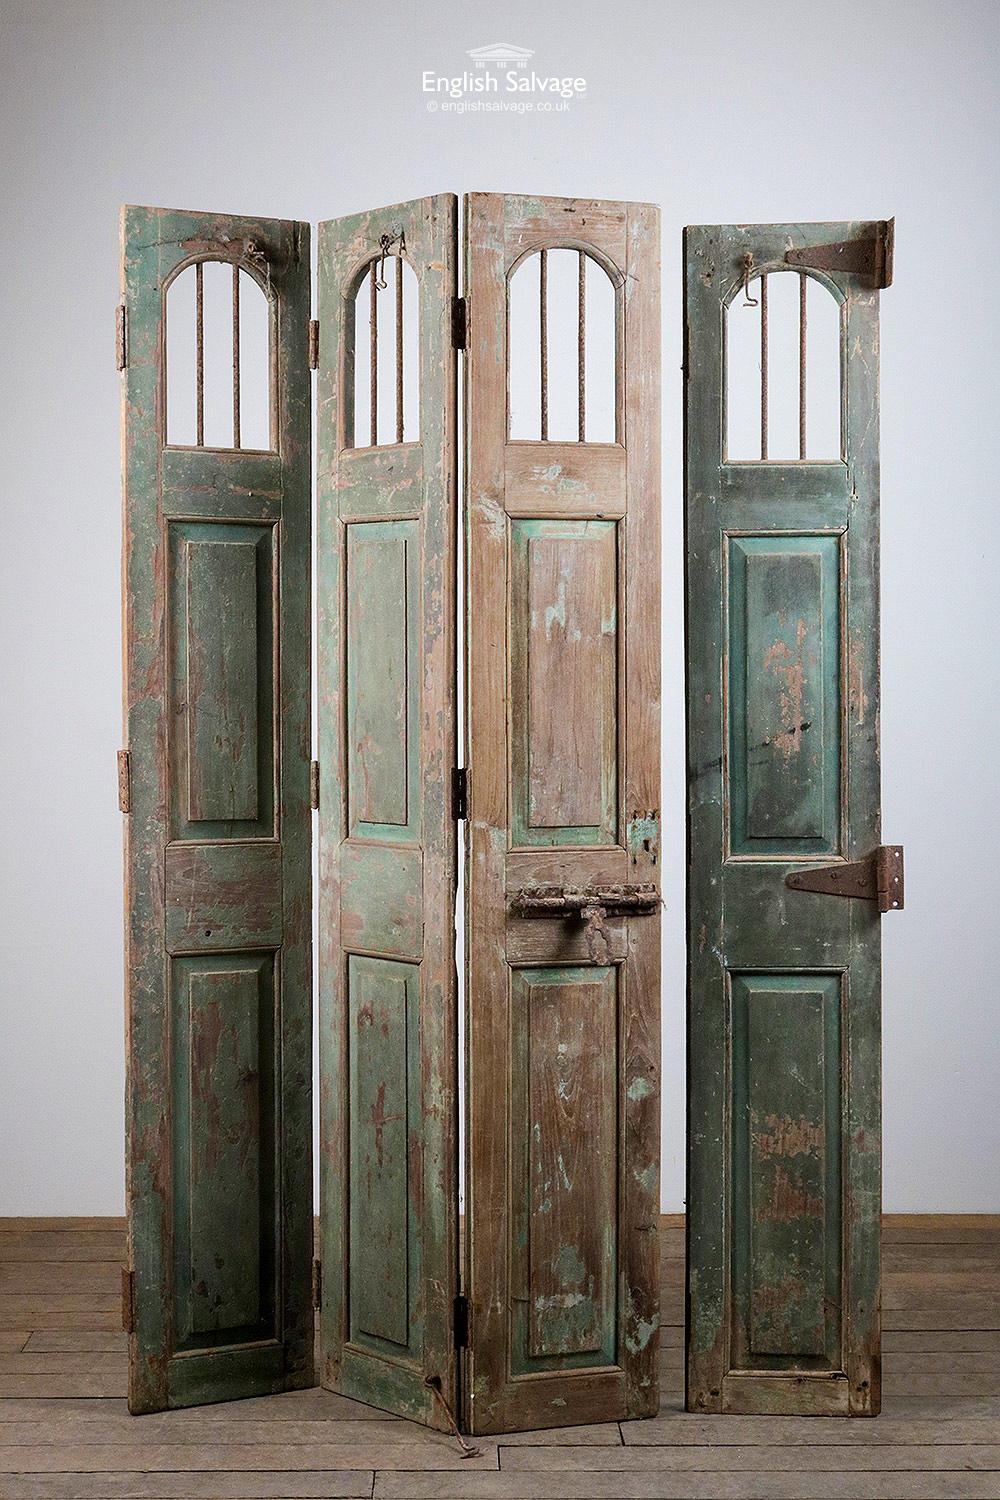 Set of reclaimed Indian hardwood paneled folding doors / shutters. Comprises of a triple folding section and one end piece (slighter shorter at 180cm high). Arched window detail to the tops with iron bars (no glass). Traces of green paint. Triple